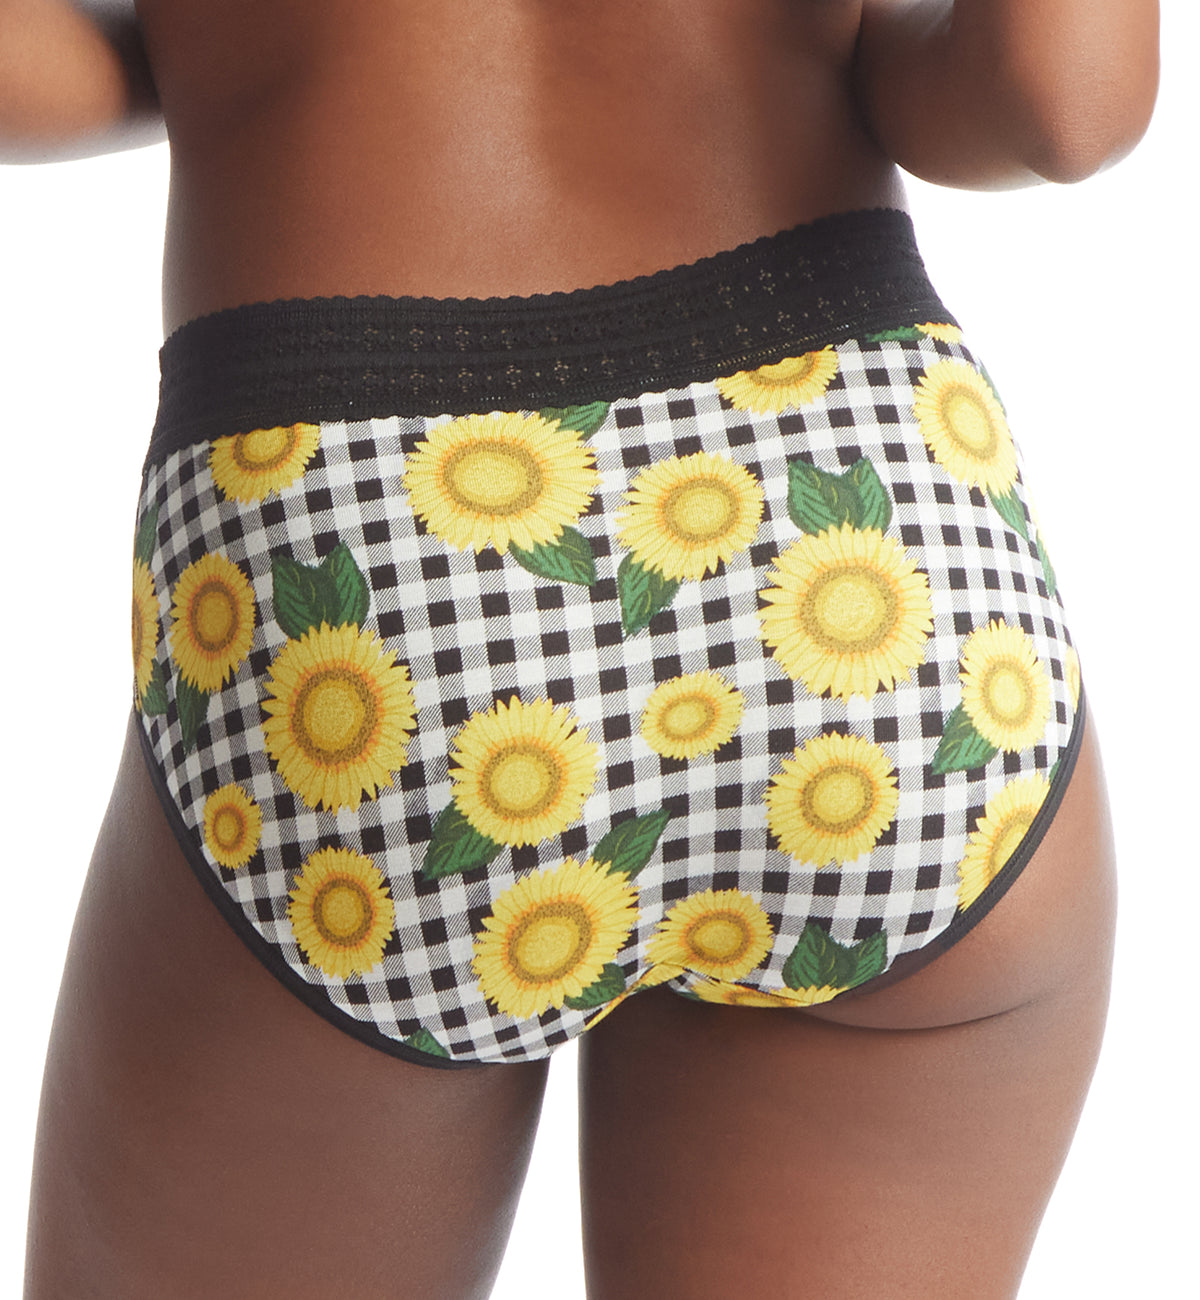 Hanky Panky Dream Printed French Brief (PR682464),Small,Fields of Gold - Fields of Gold,Small